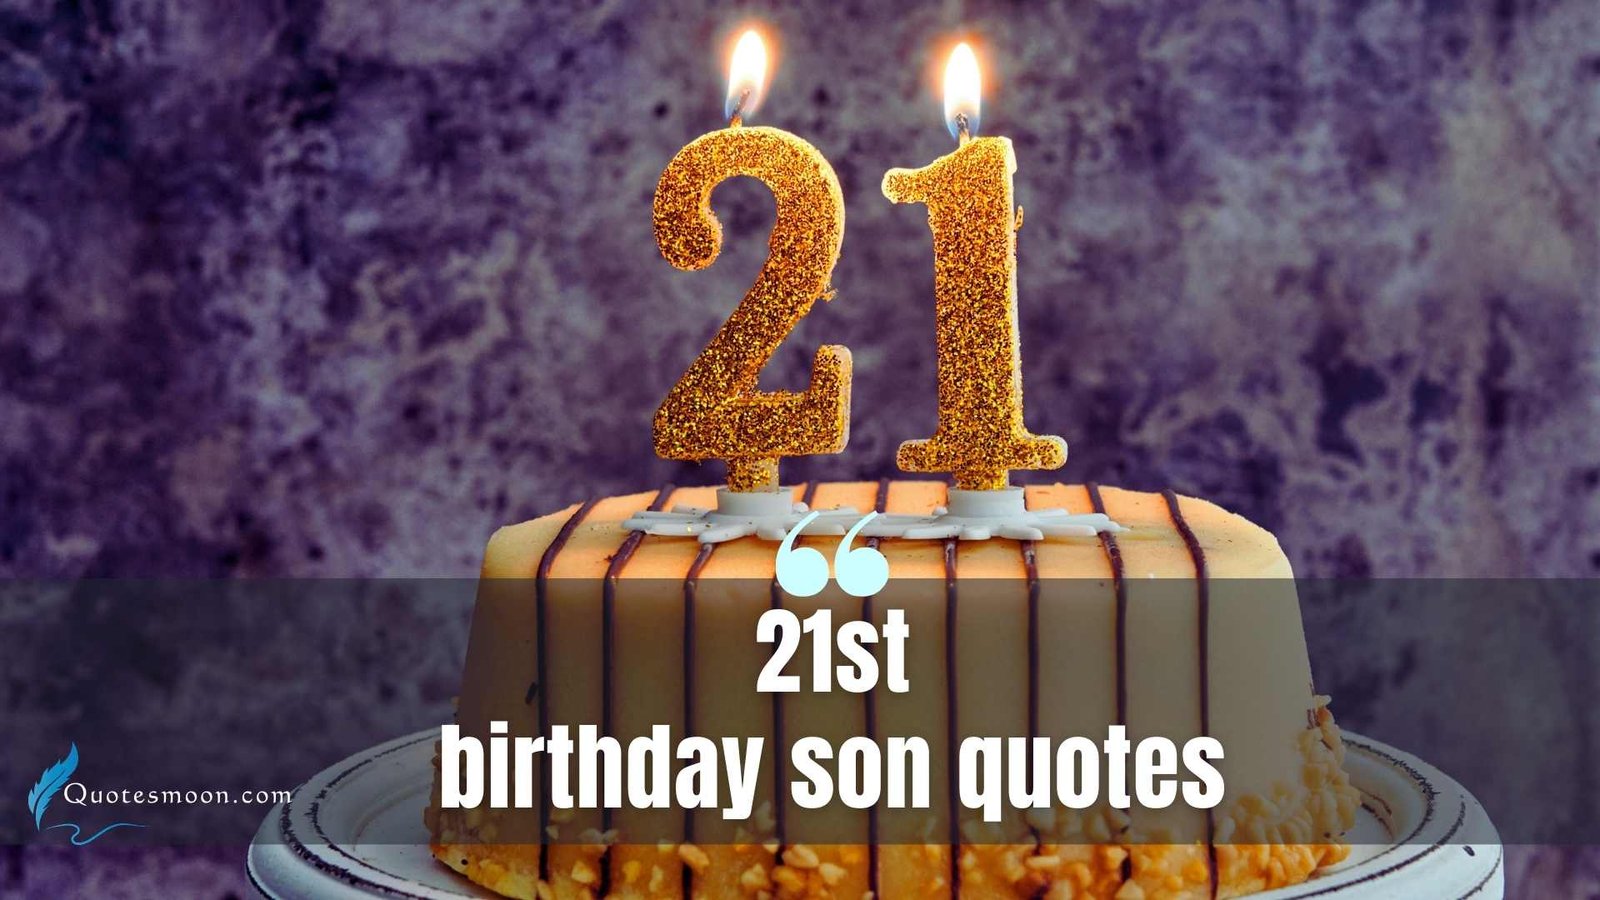 21st birthday son quotes images